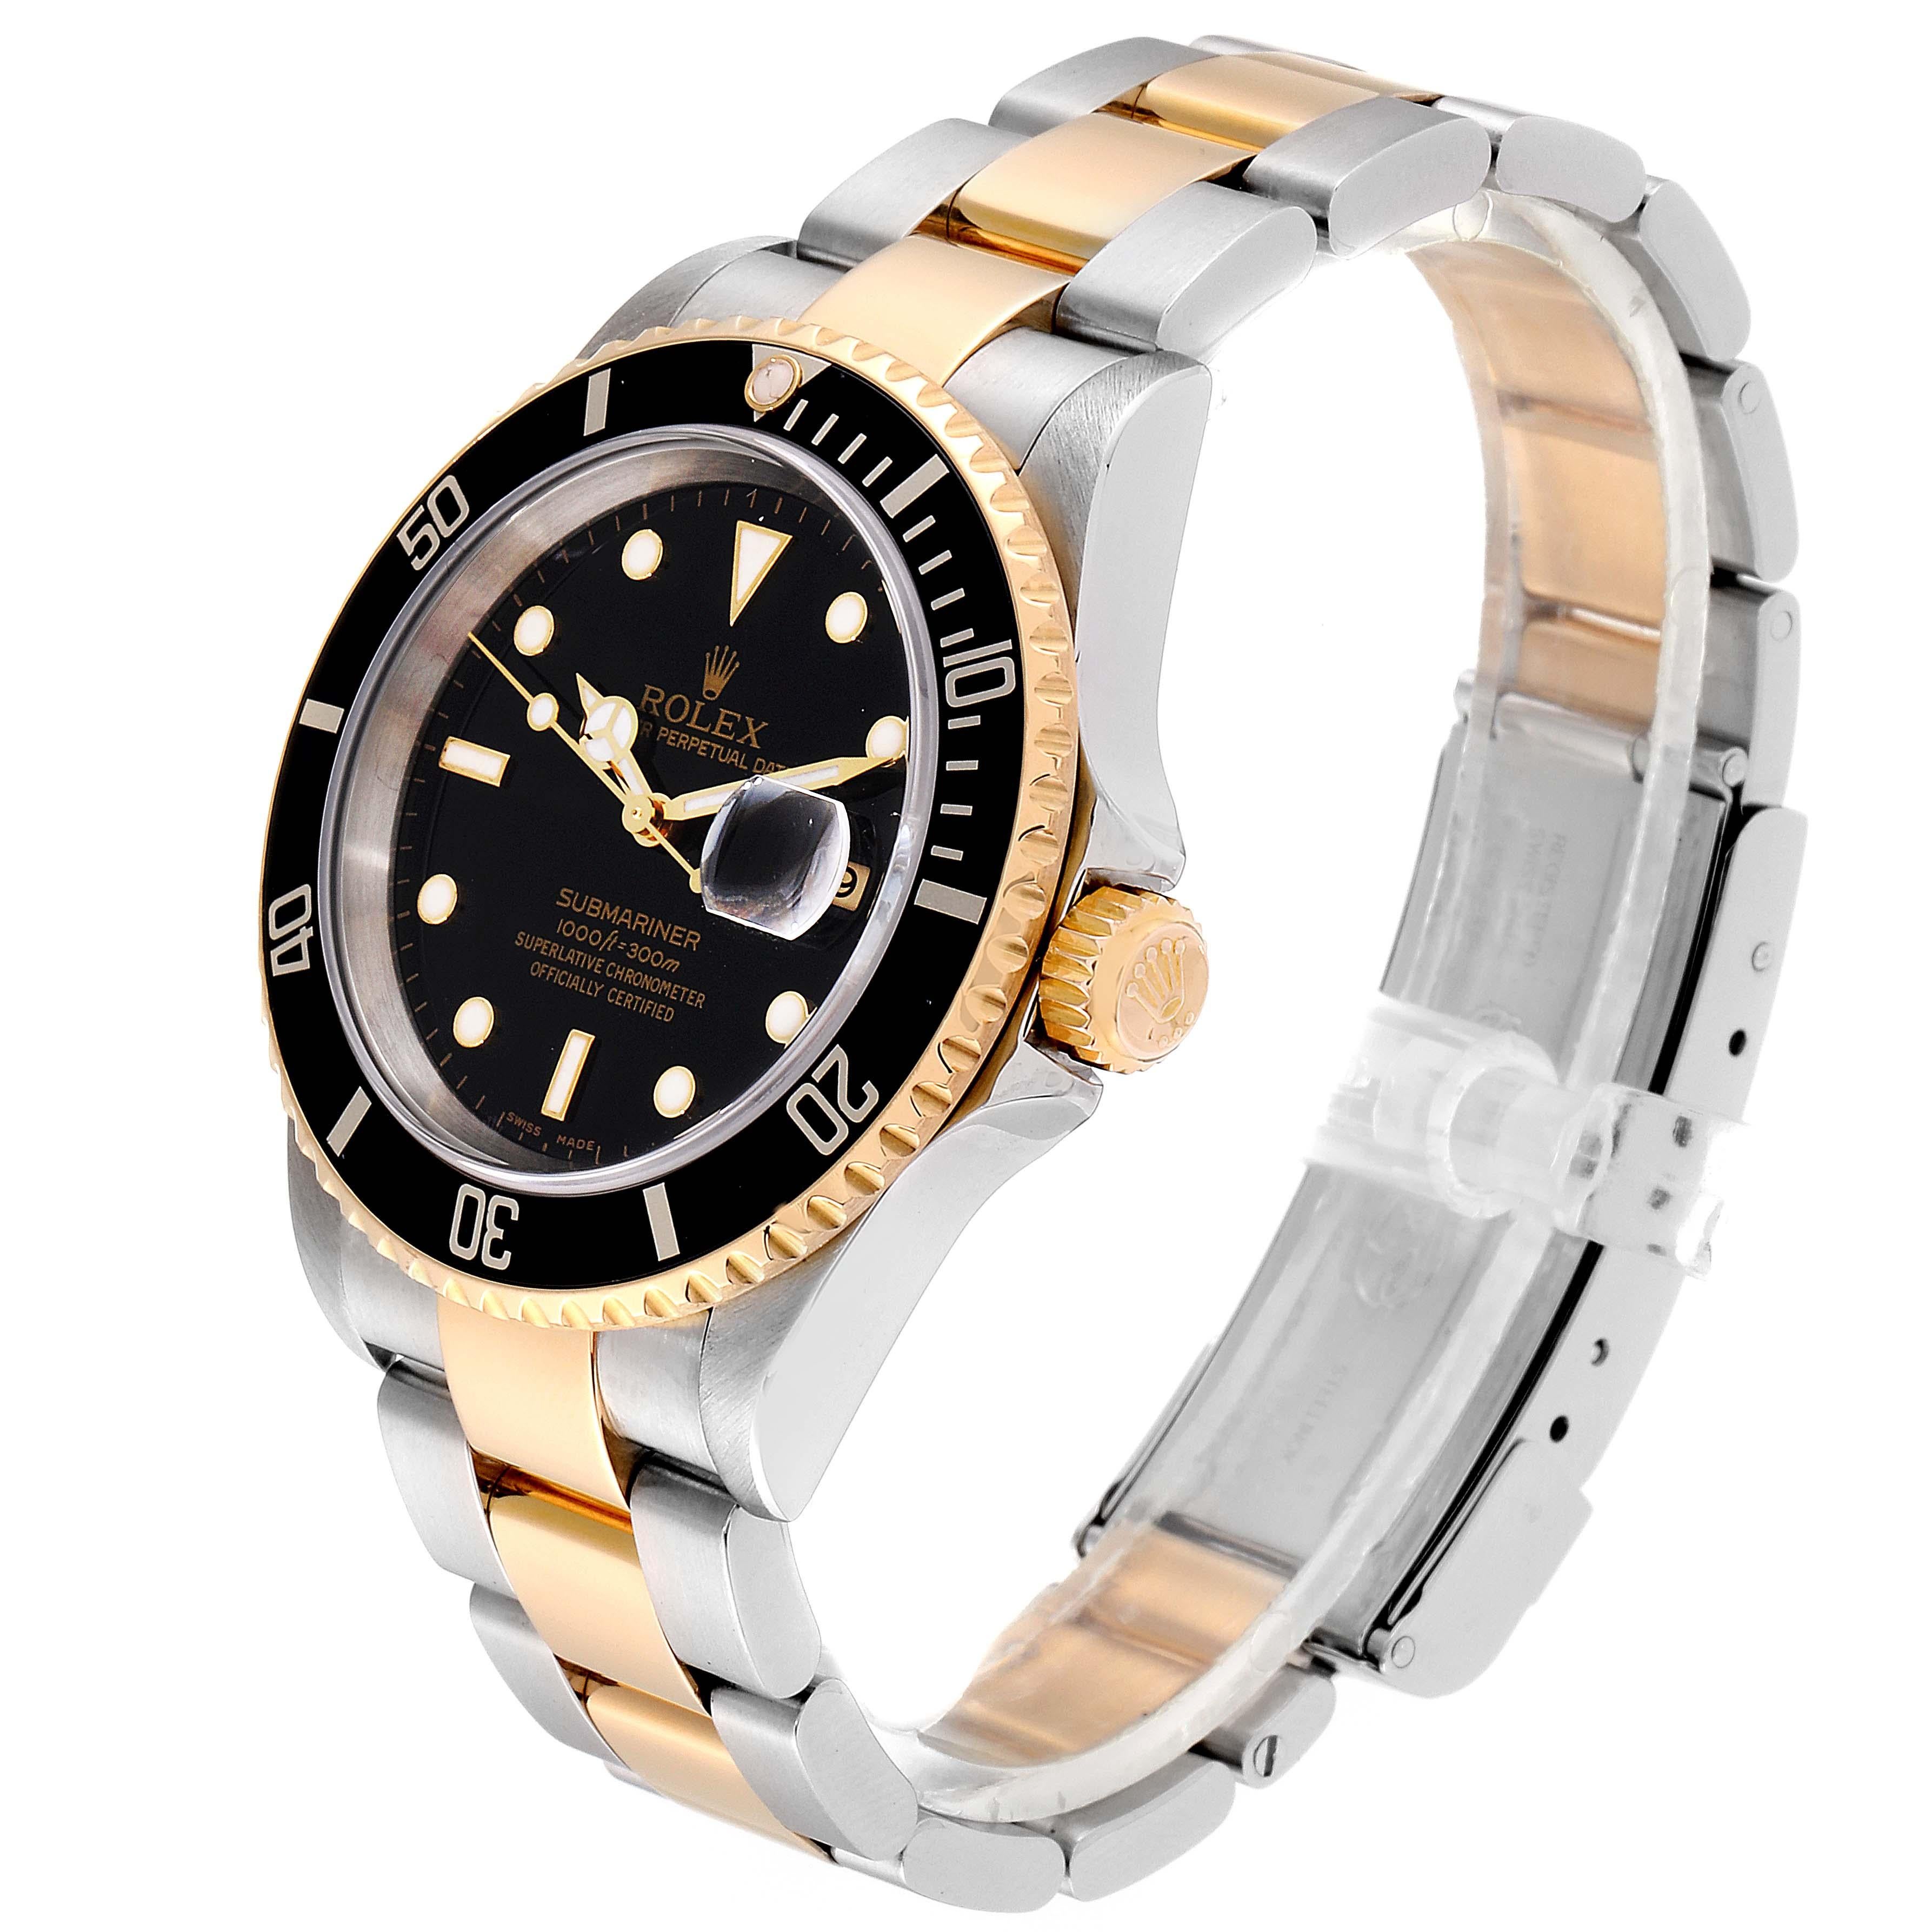 Rolex Submariner Date Steel Yellow Gold Men's Watch 16613 Box Papers 1